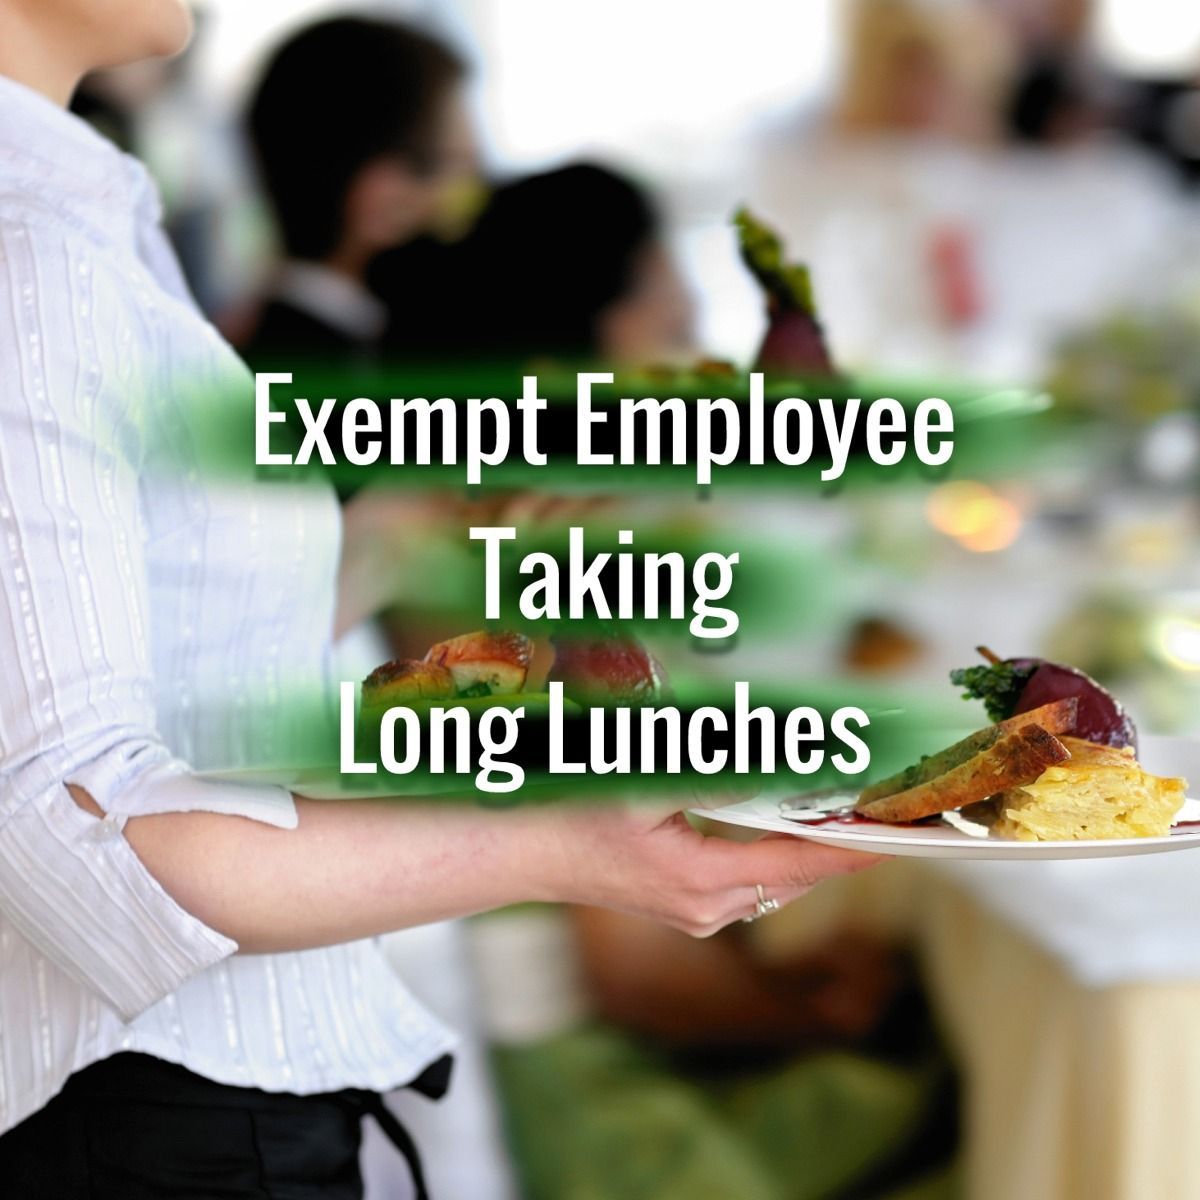 Exempt Employee Taking Long Lunches